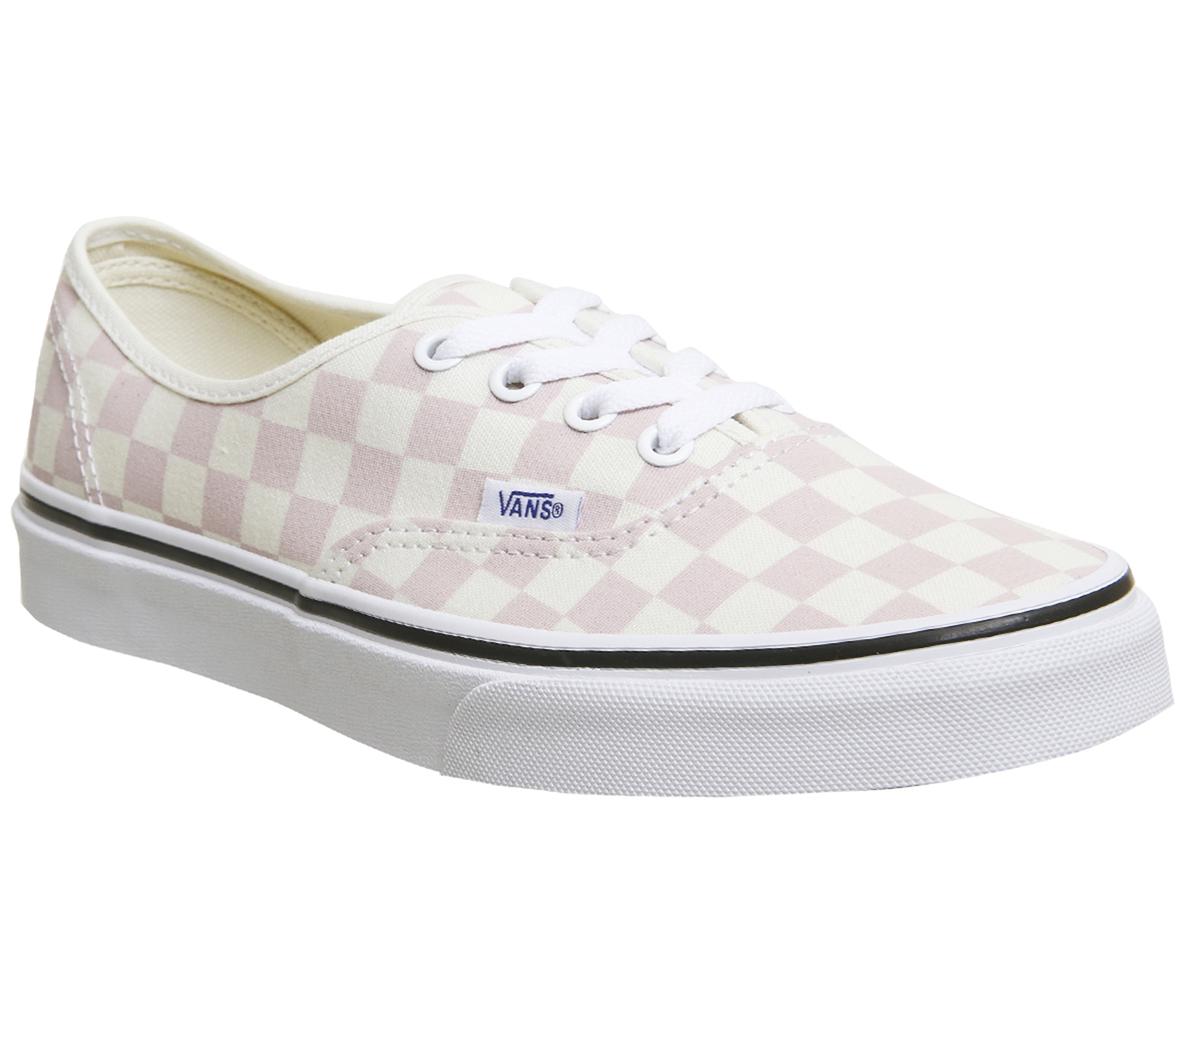 light pink and white checkered vans